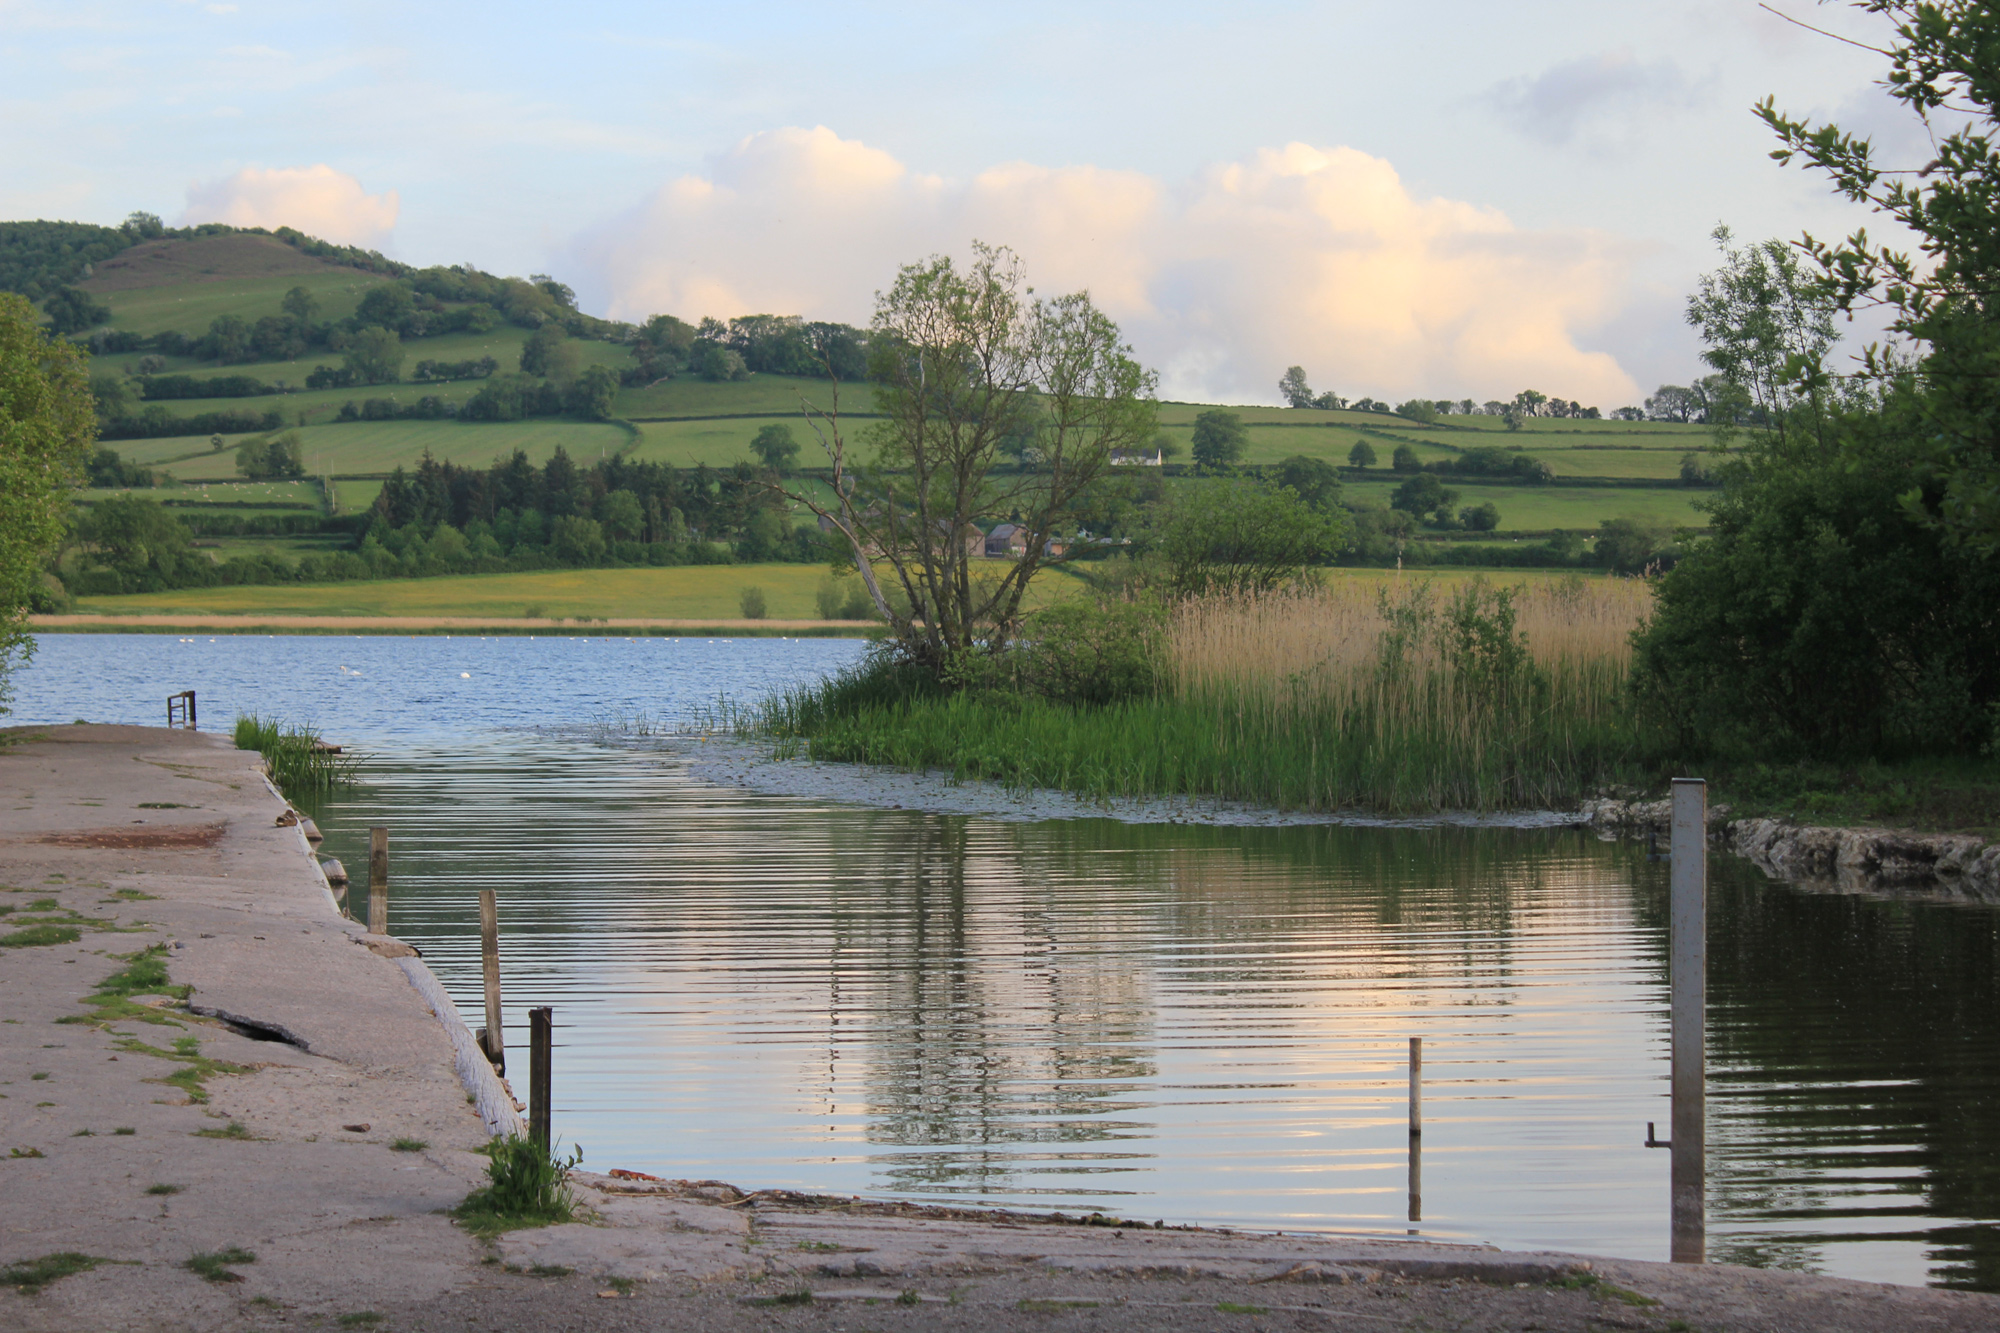 Llangorse Lake in the Brecon Beacons, June